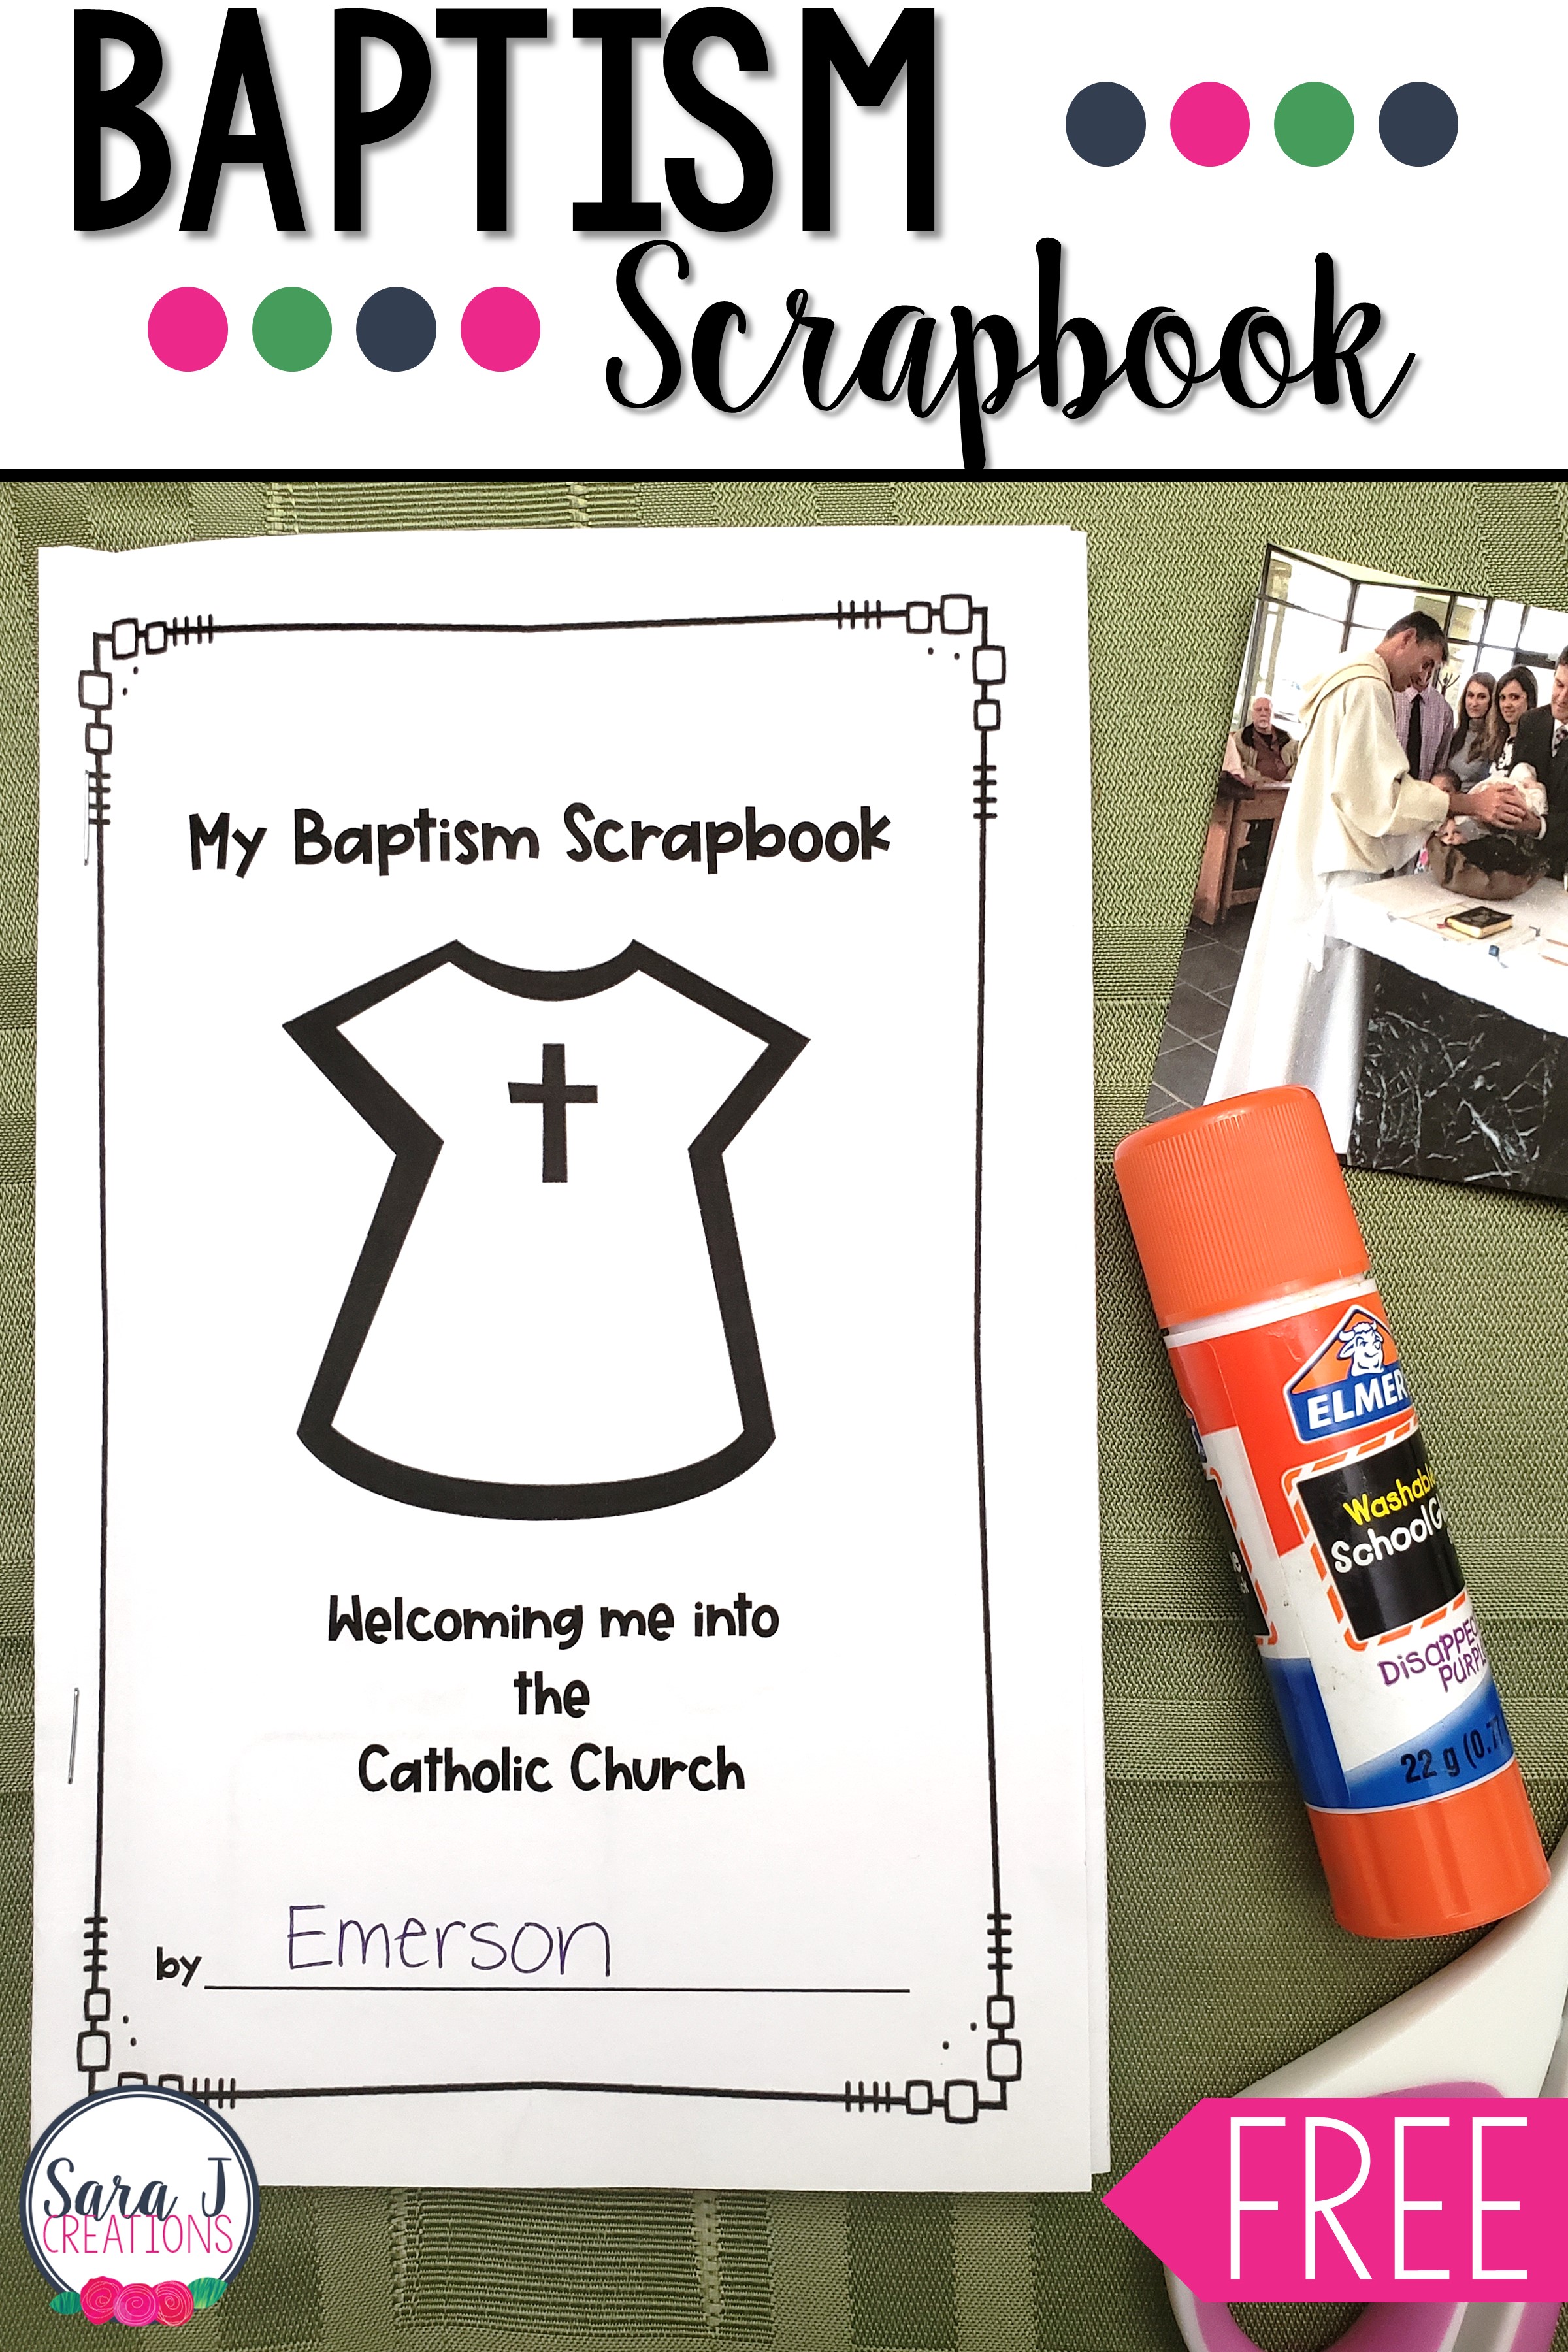 Download your FREE Catholic Baptism Scrapbook to help students learn all about this special sacrament and how theirs was celebrated